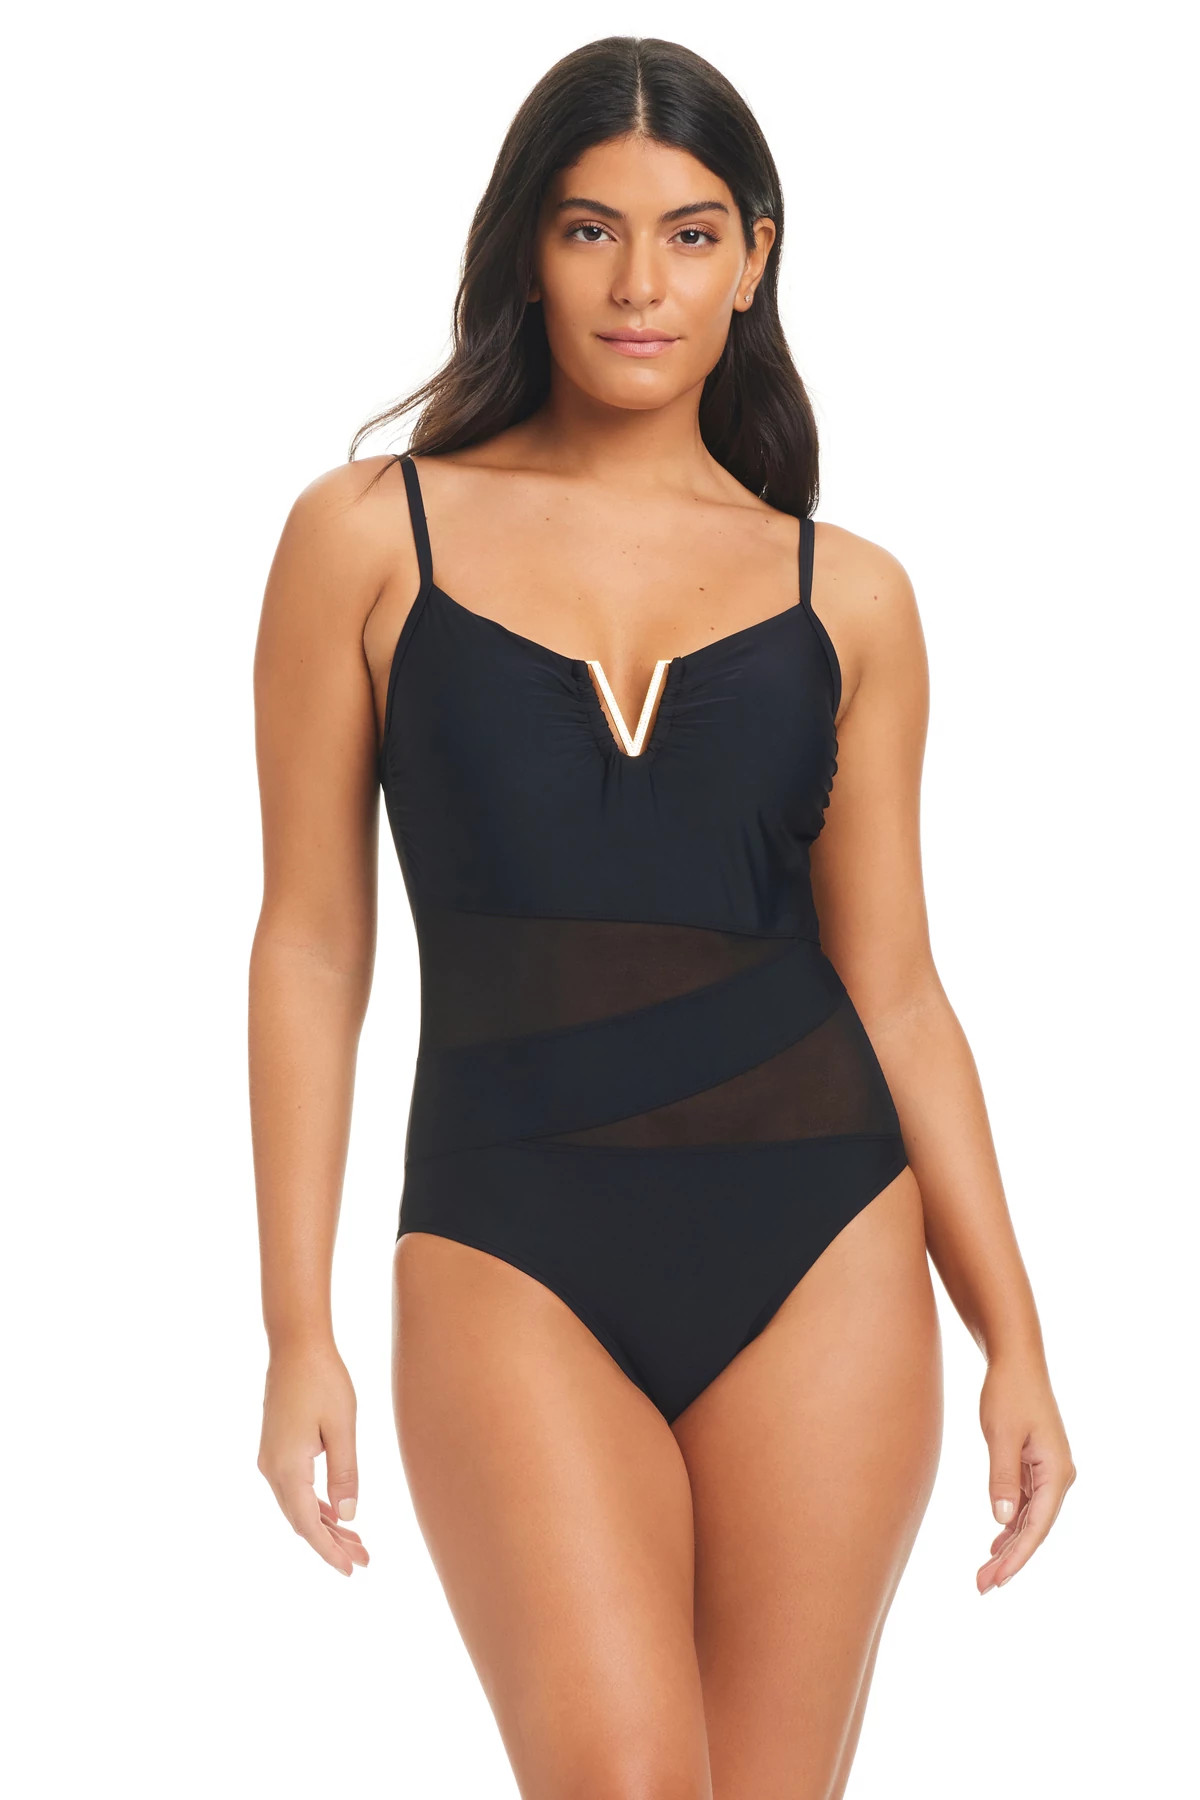 Swimsuits For All, Swim, Swimsuits For All Nwt Bandeau Blouson Tankini  Top